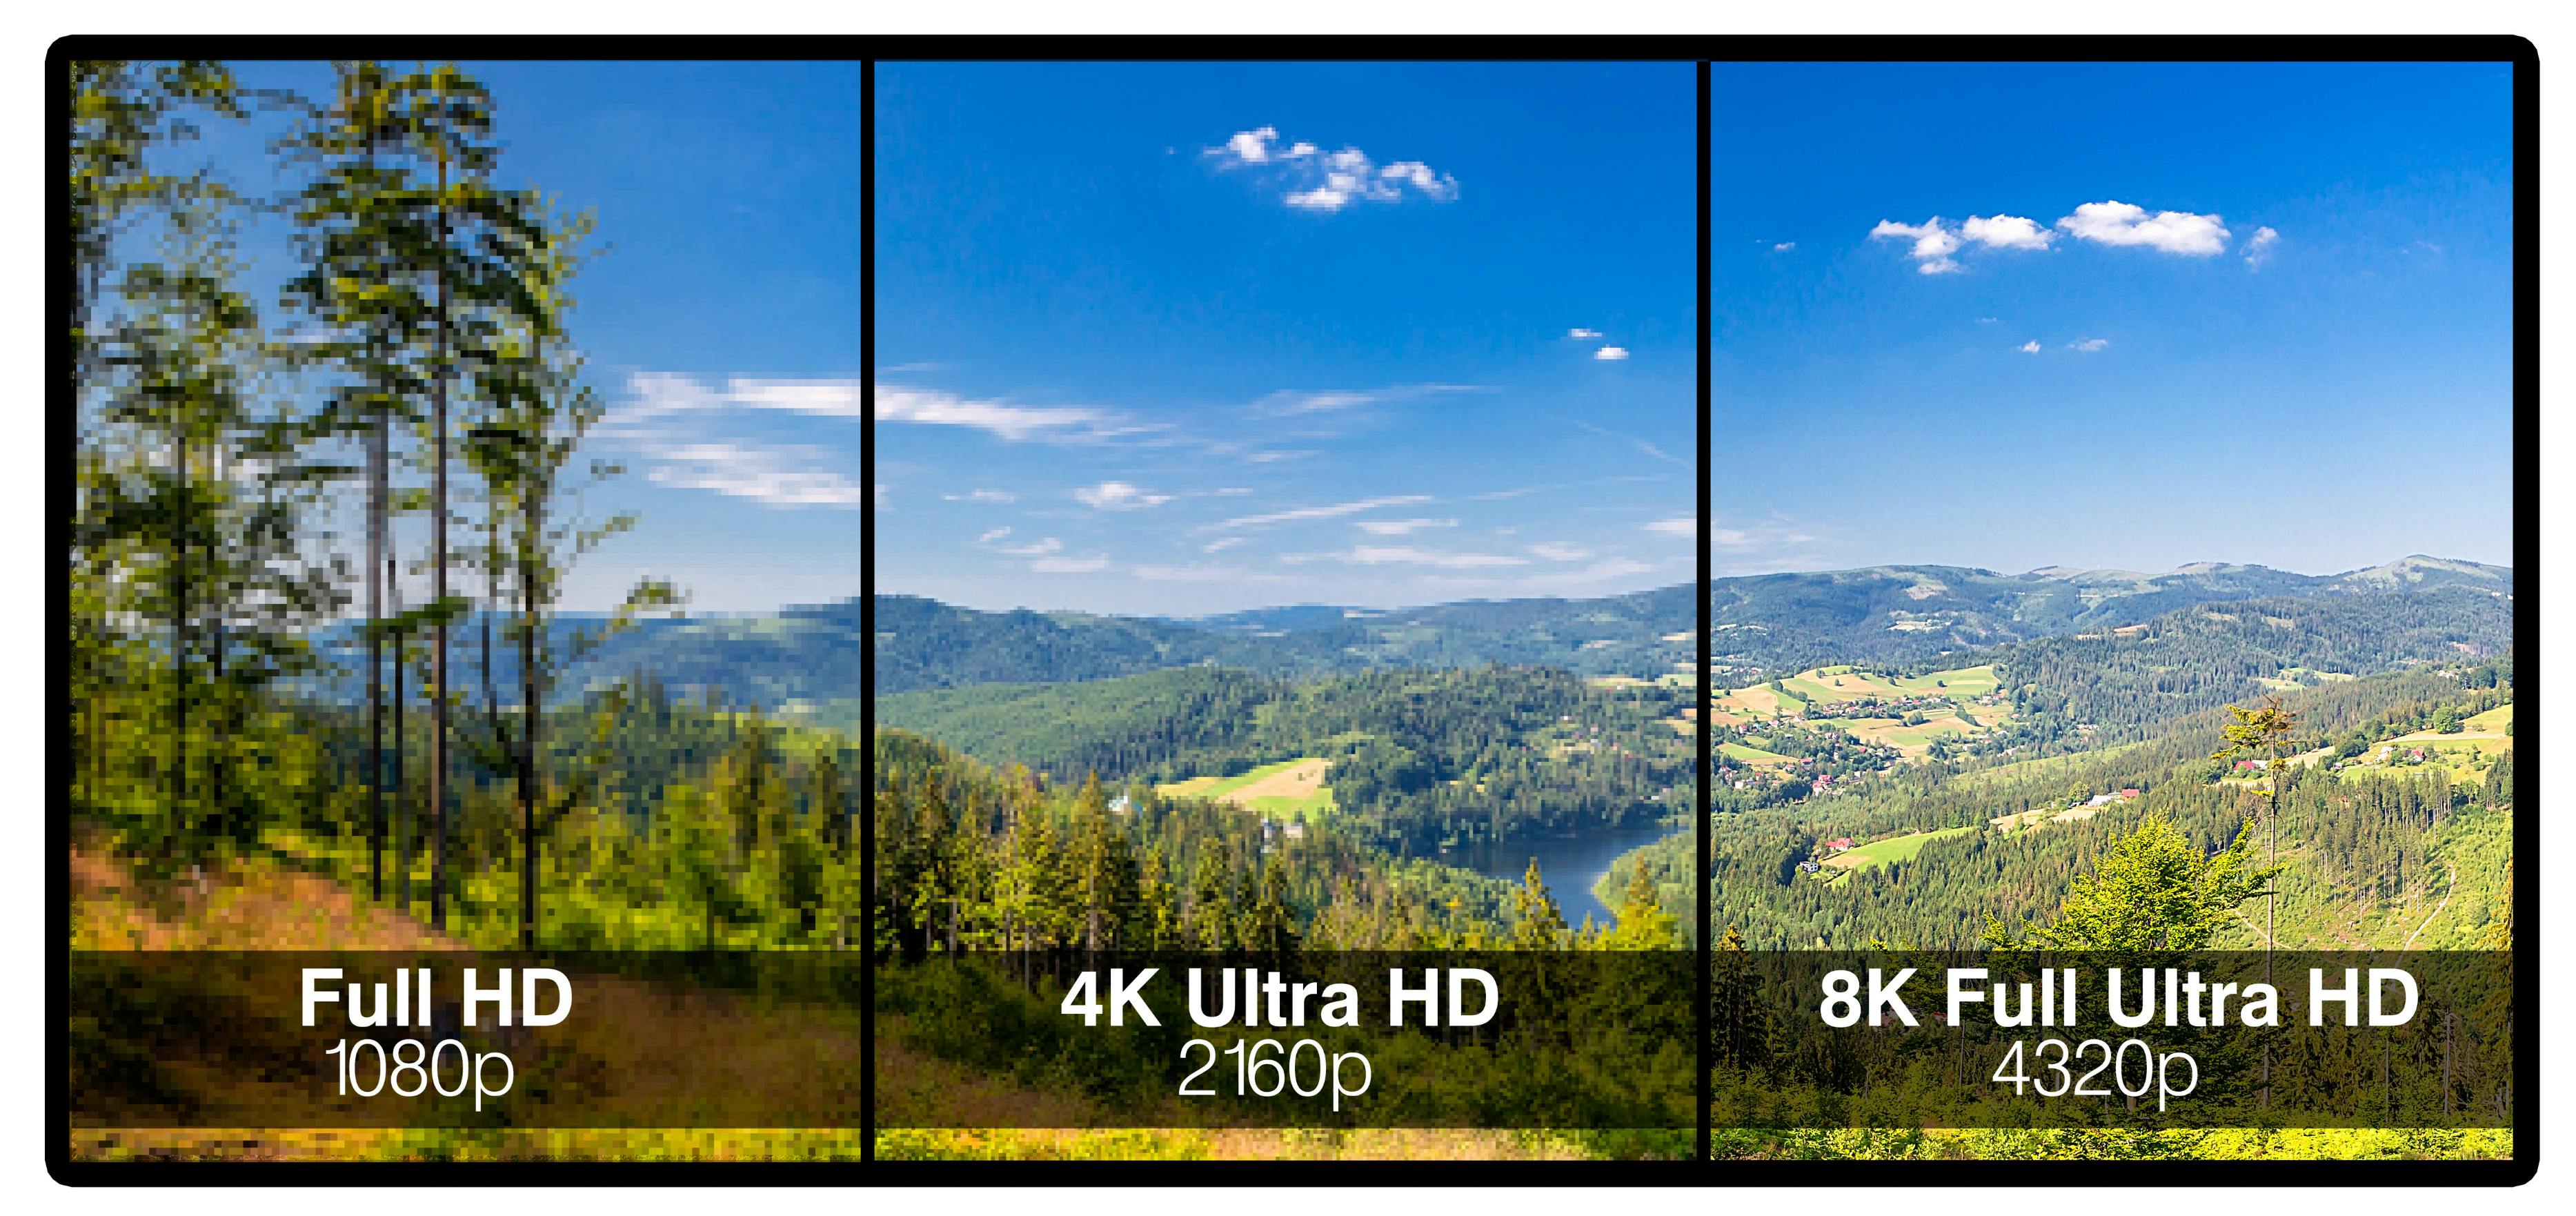 Comparison of Full HD, 4K and 8k